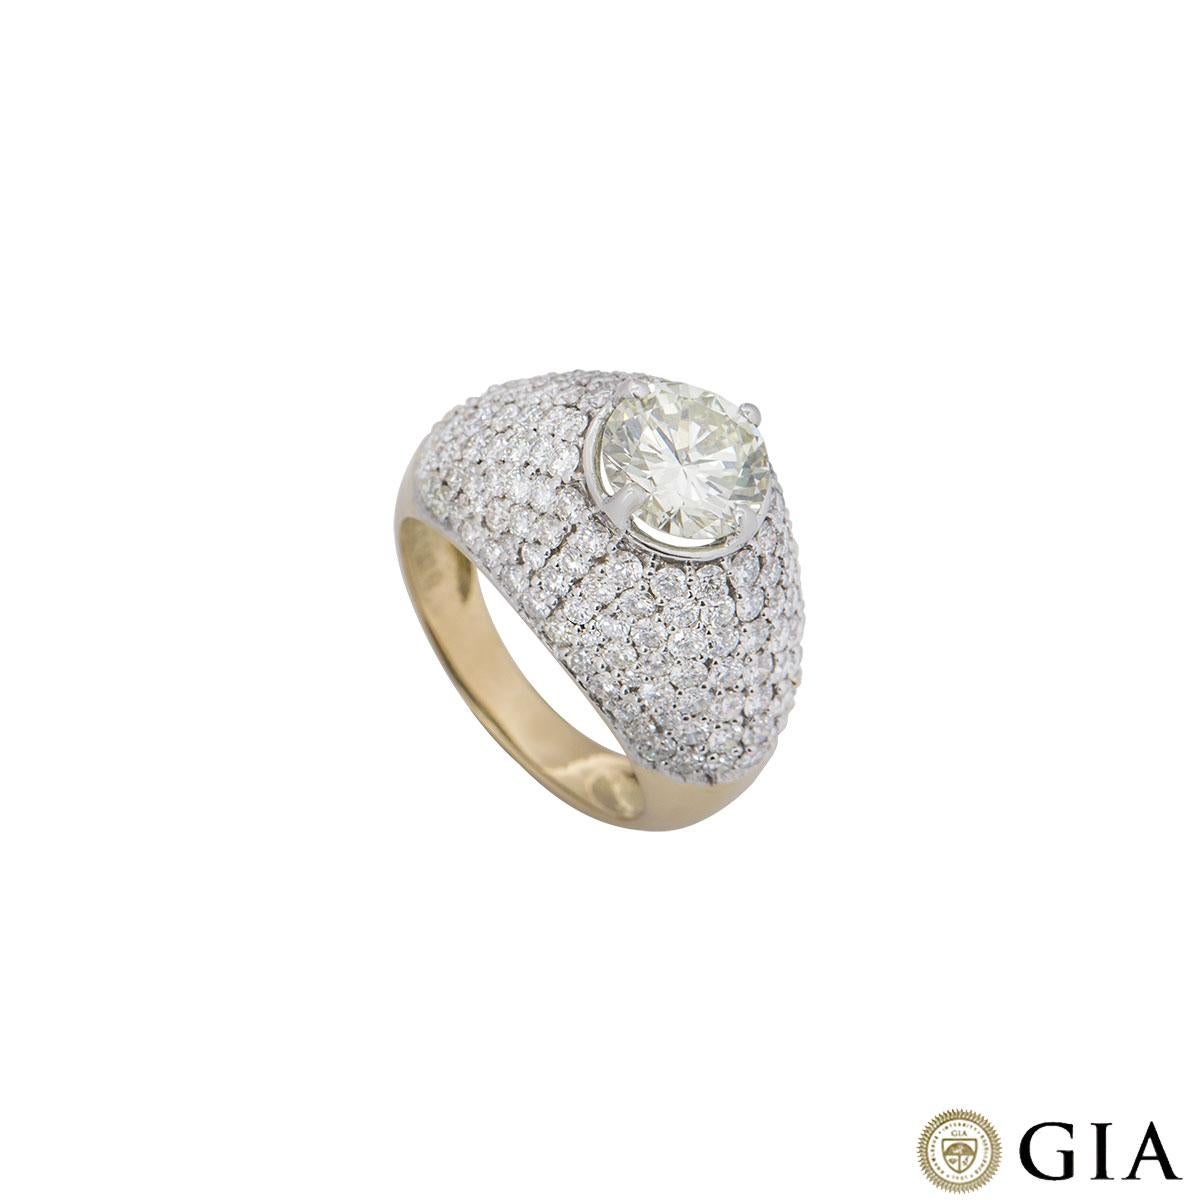 An 18k yellow gold diamond bombe ring. The ring is set to the centre with a 1.67ct round brilliant cut diamond, O to P range in colour and VVS2 clarity in a four claw setting. The diamond is accentuated by a bombe style pave set diamond border